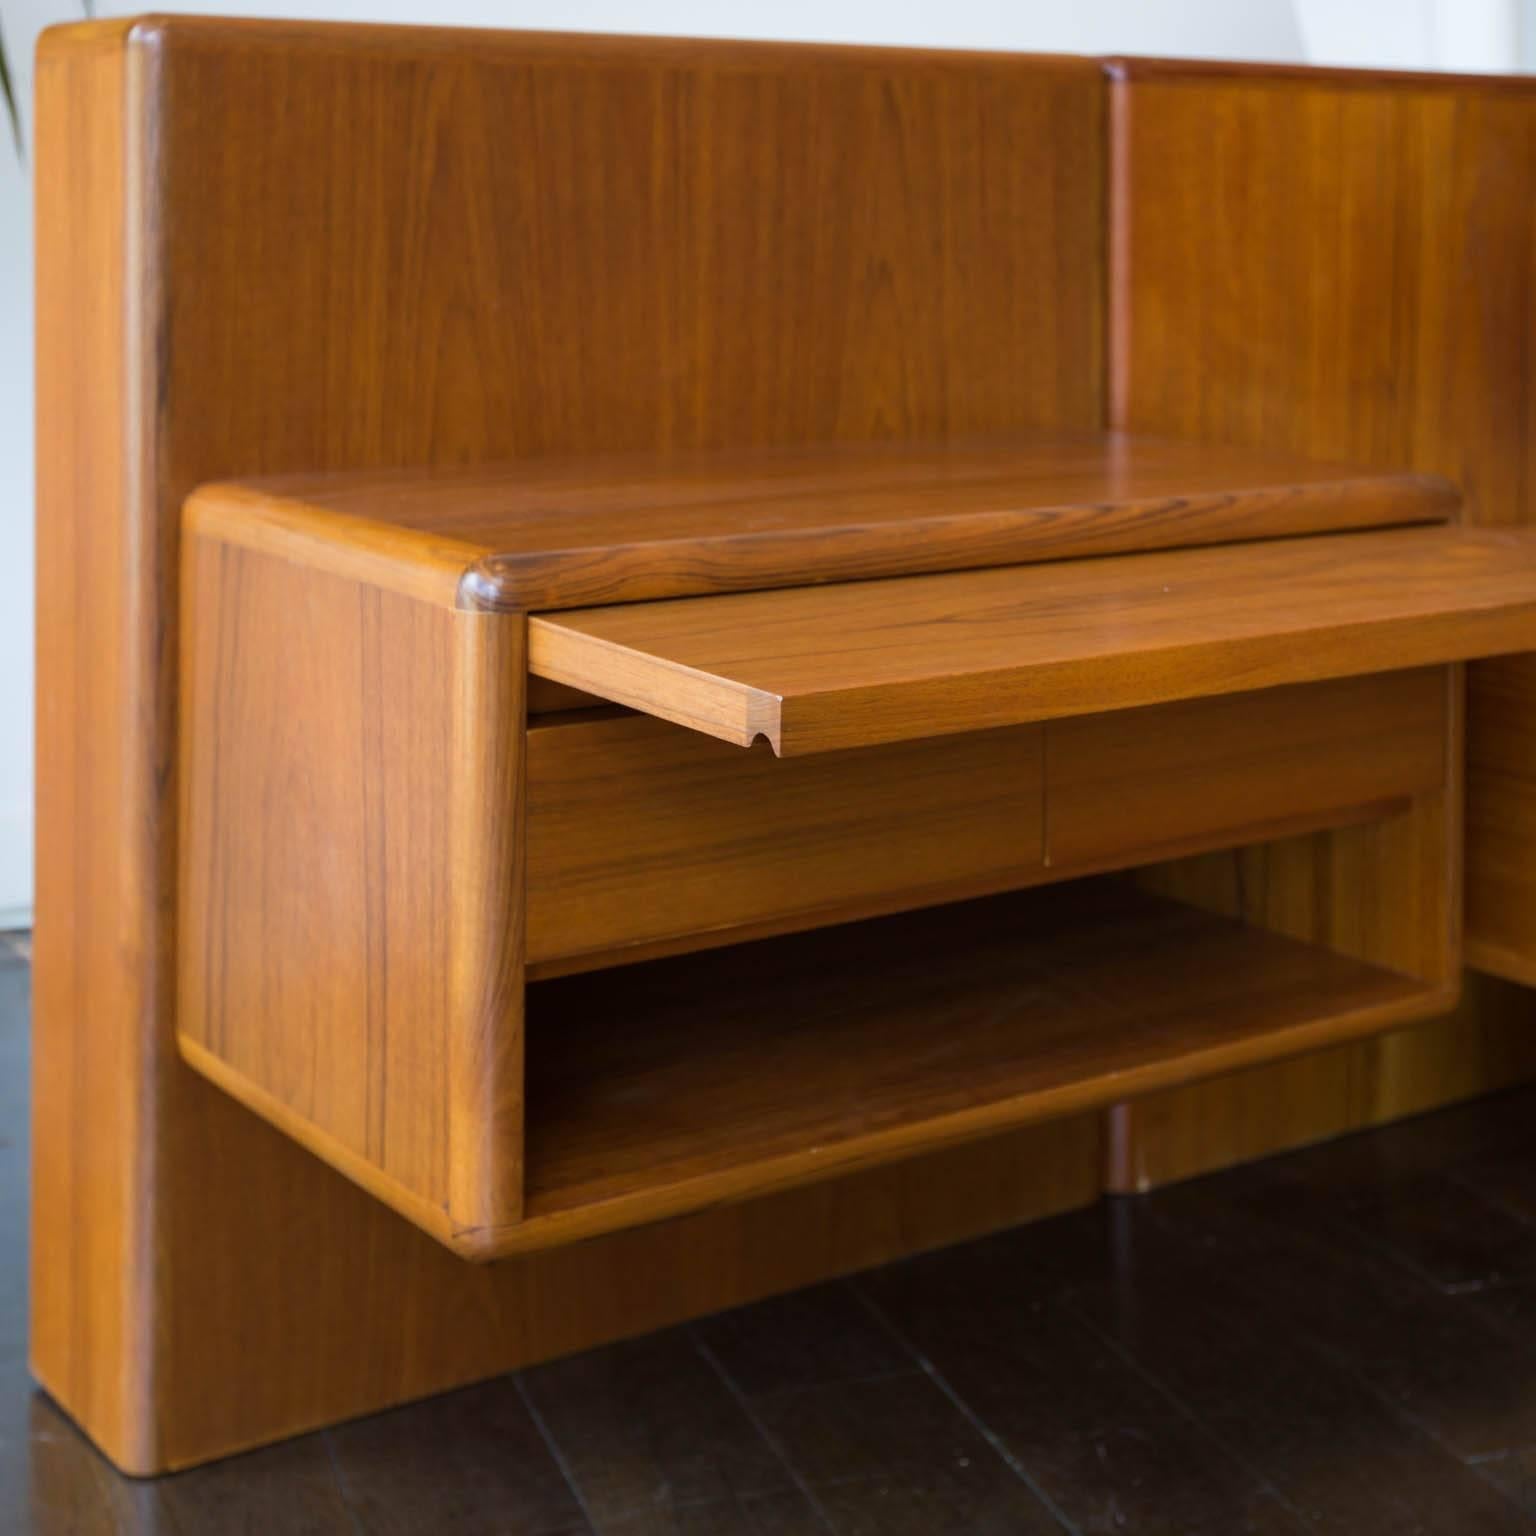 One of the better versions of 1970s era teak platform beds with floating nightstands, this piece features a sliding drink shelf and two drawers per side. Refinished and ready for your mattress.